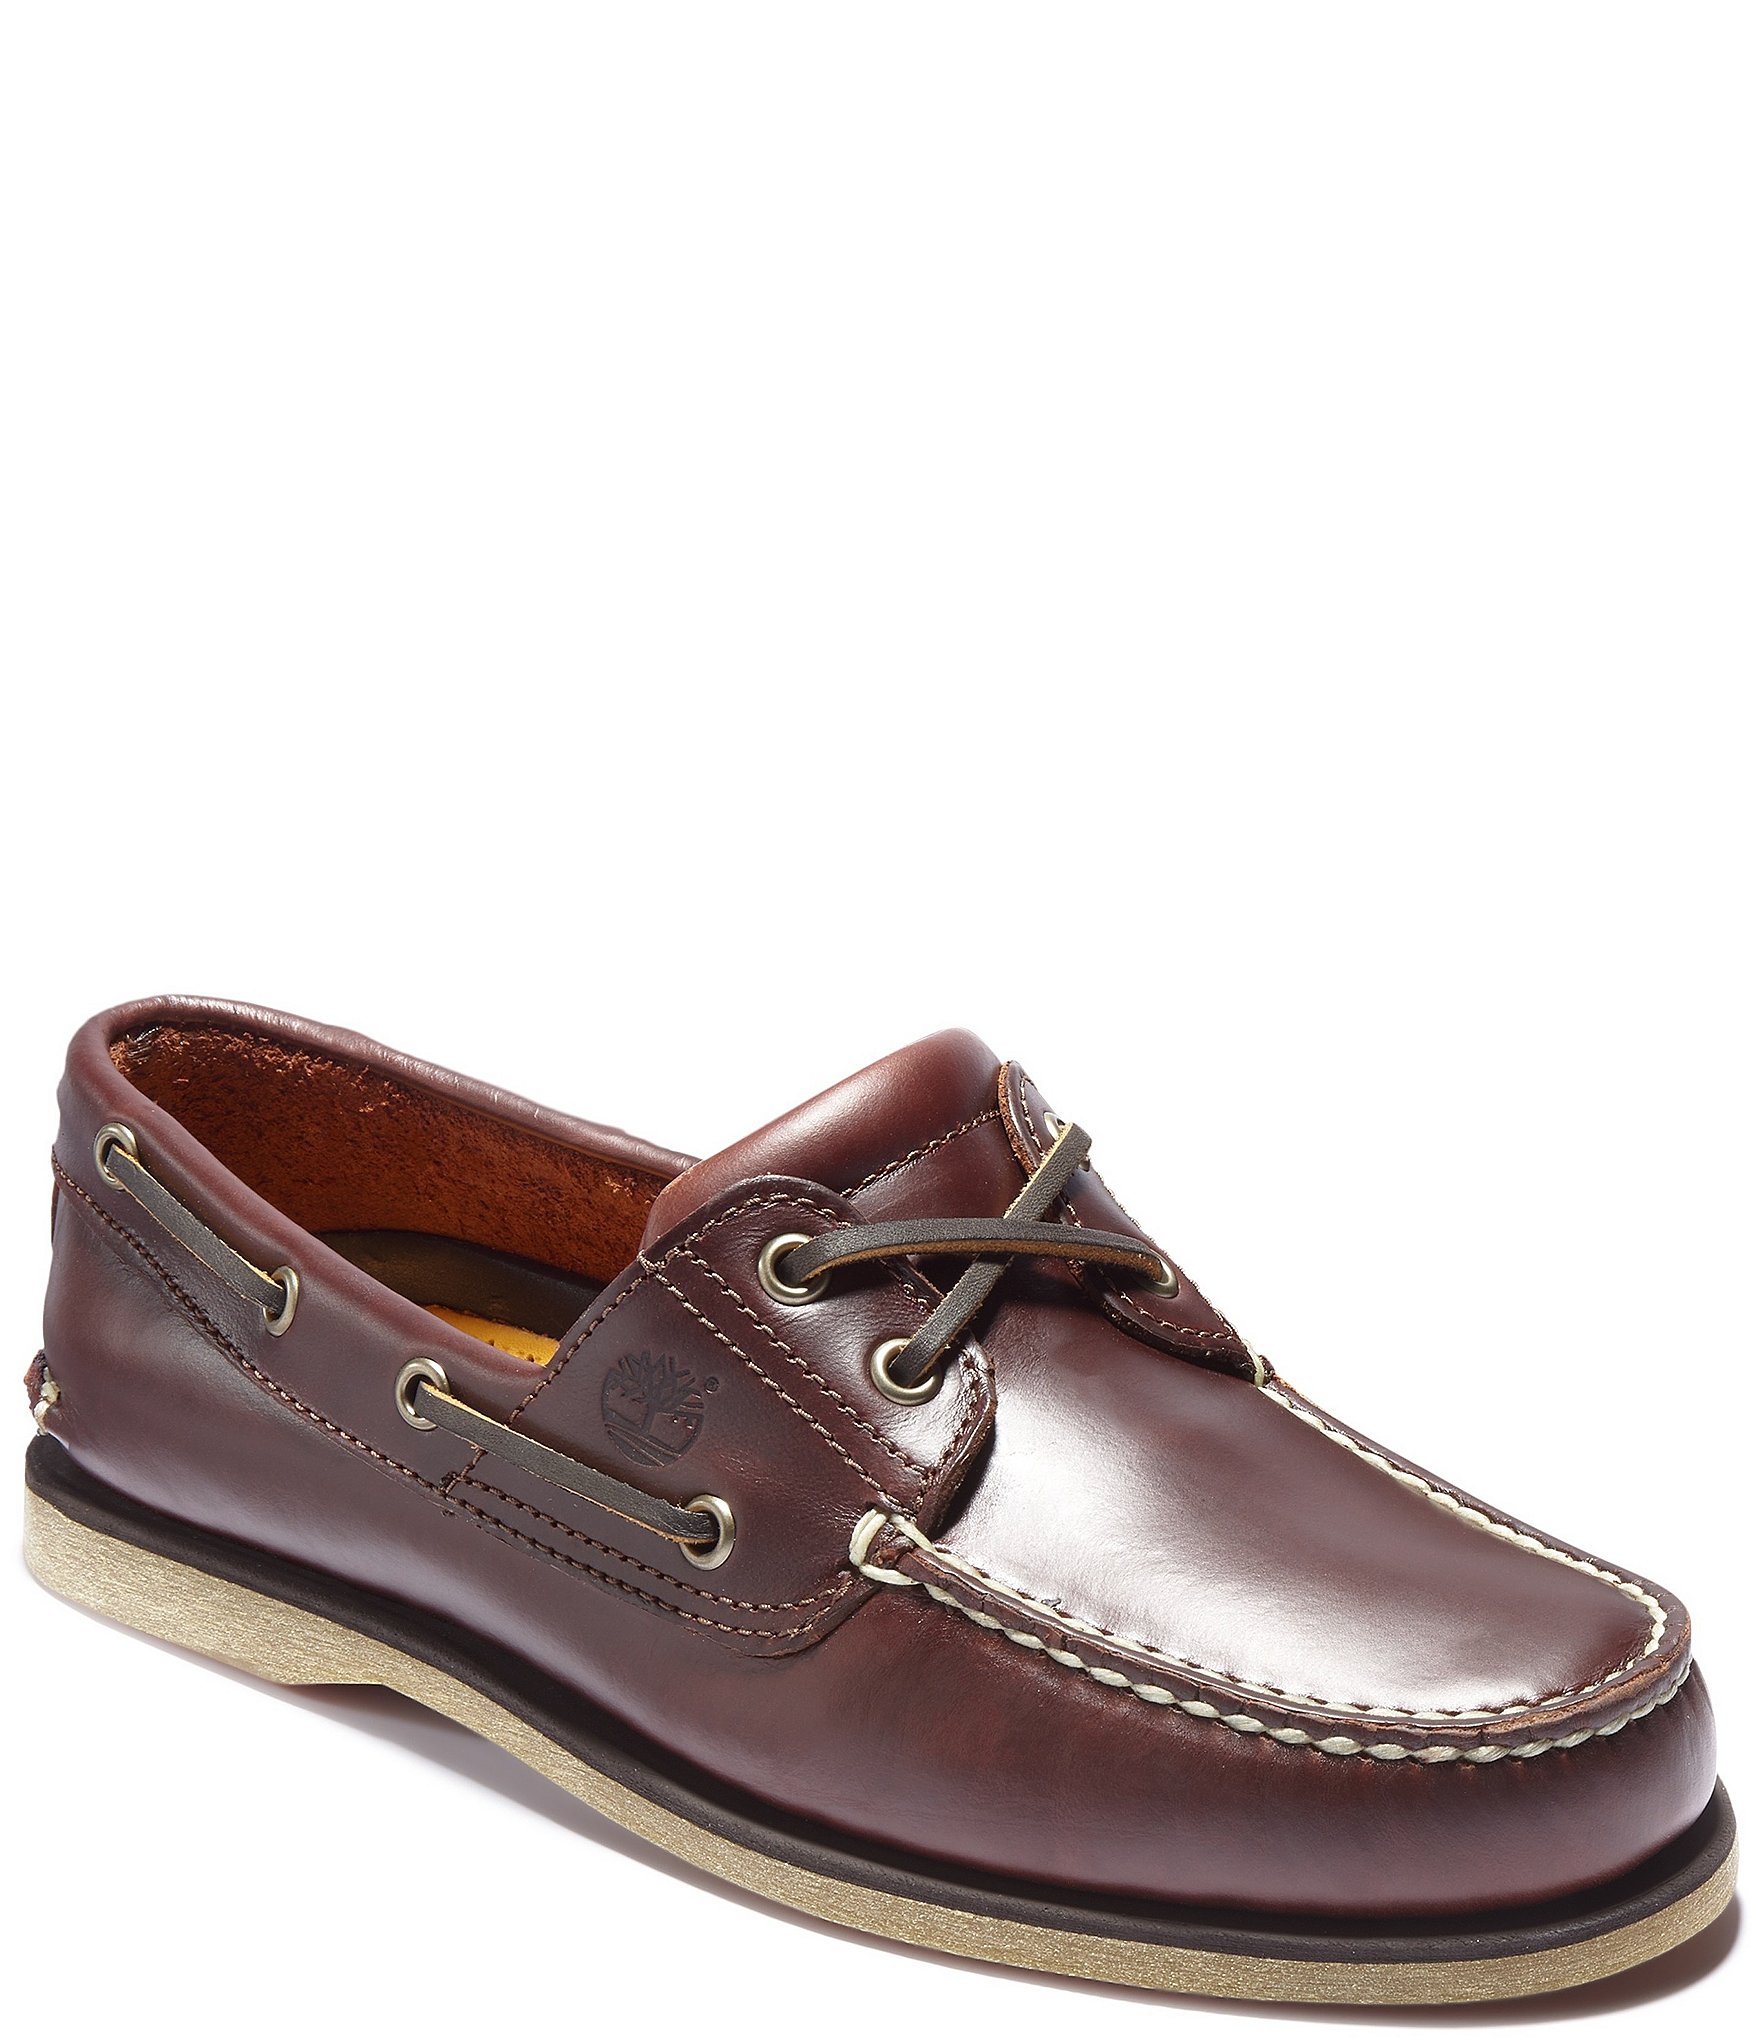 Classic Leather Shoes | Dillard's